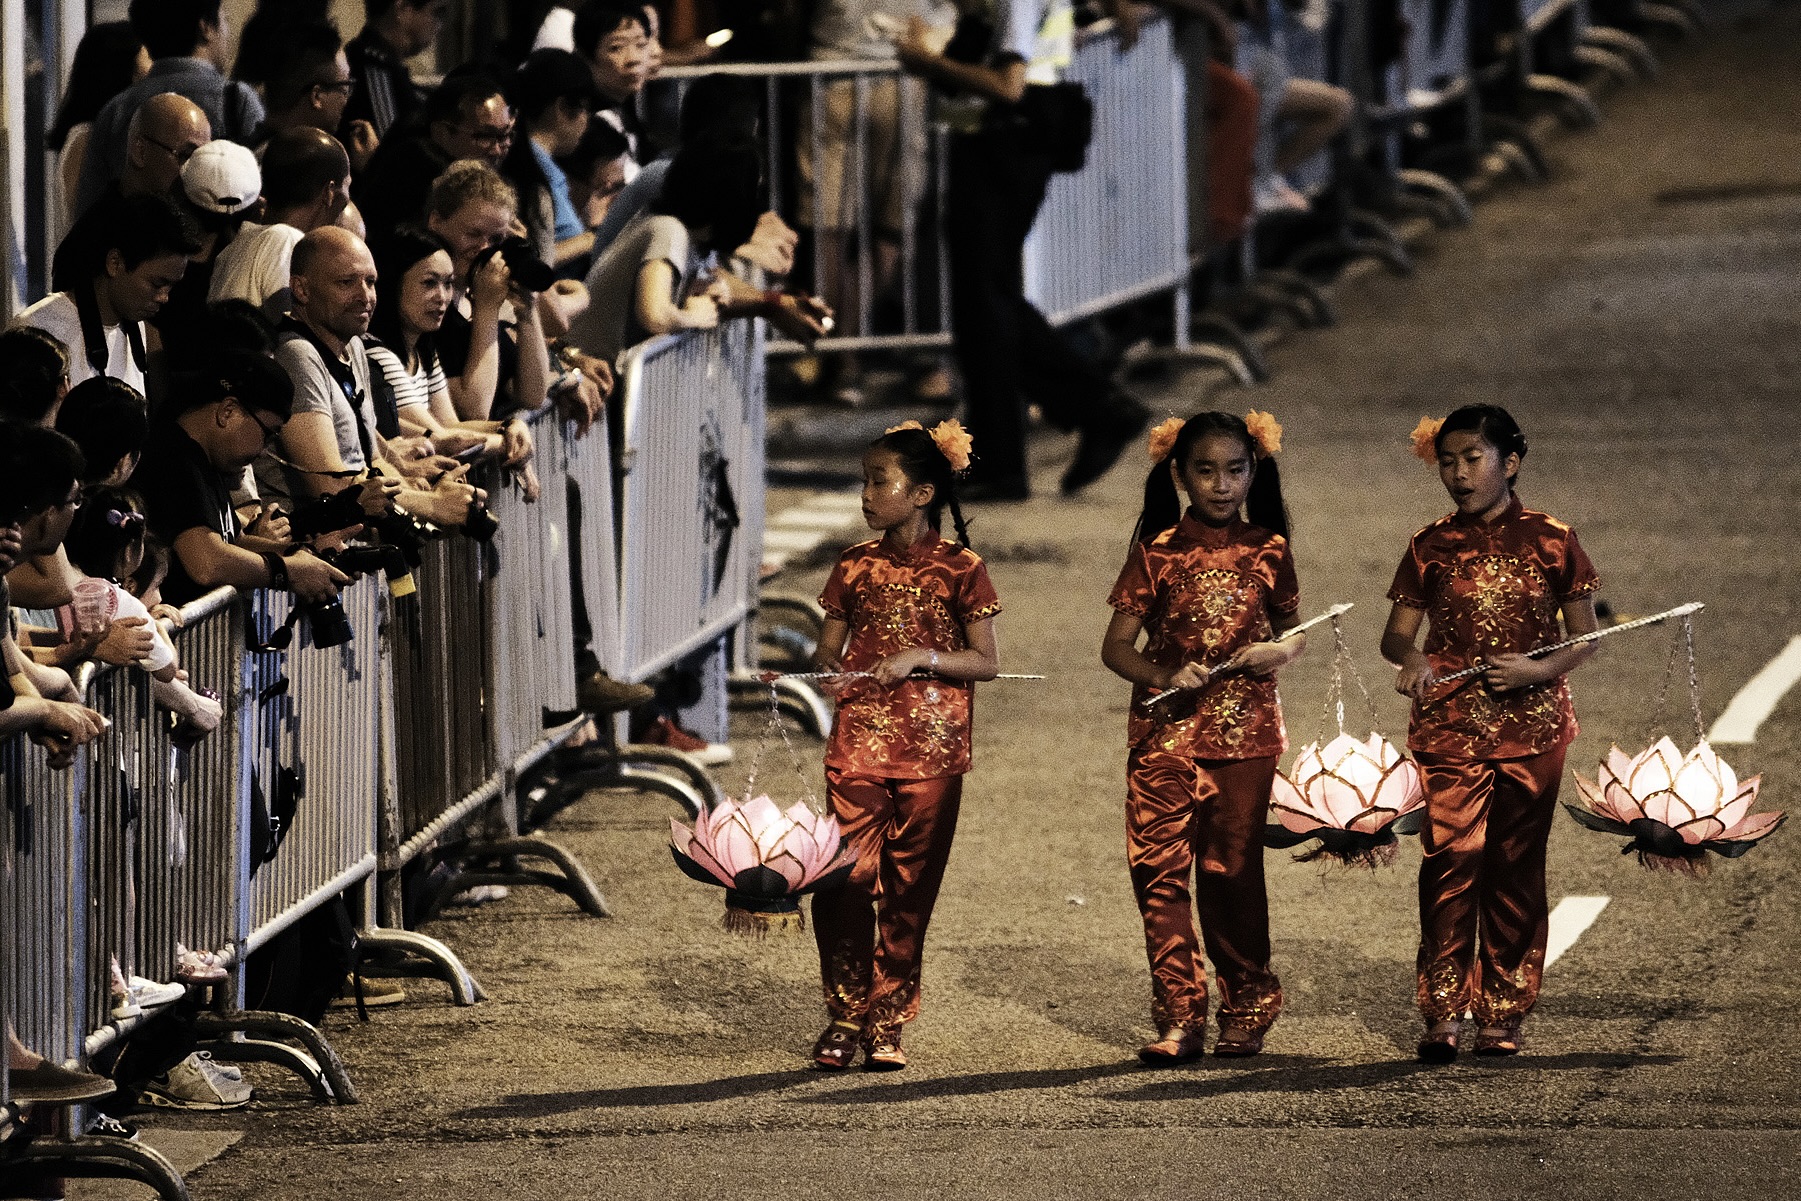 Three children wearing traditional Chinese outfits hold lotus-shaped lanterns suspended from rods and walk ahead of the fire dragon dance procession. A crowd of people from behind a barricade watch them.